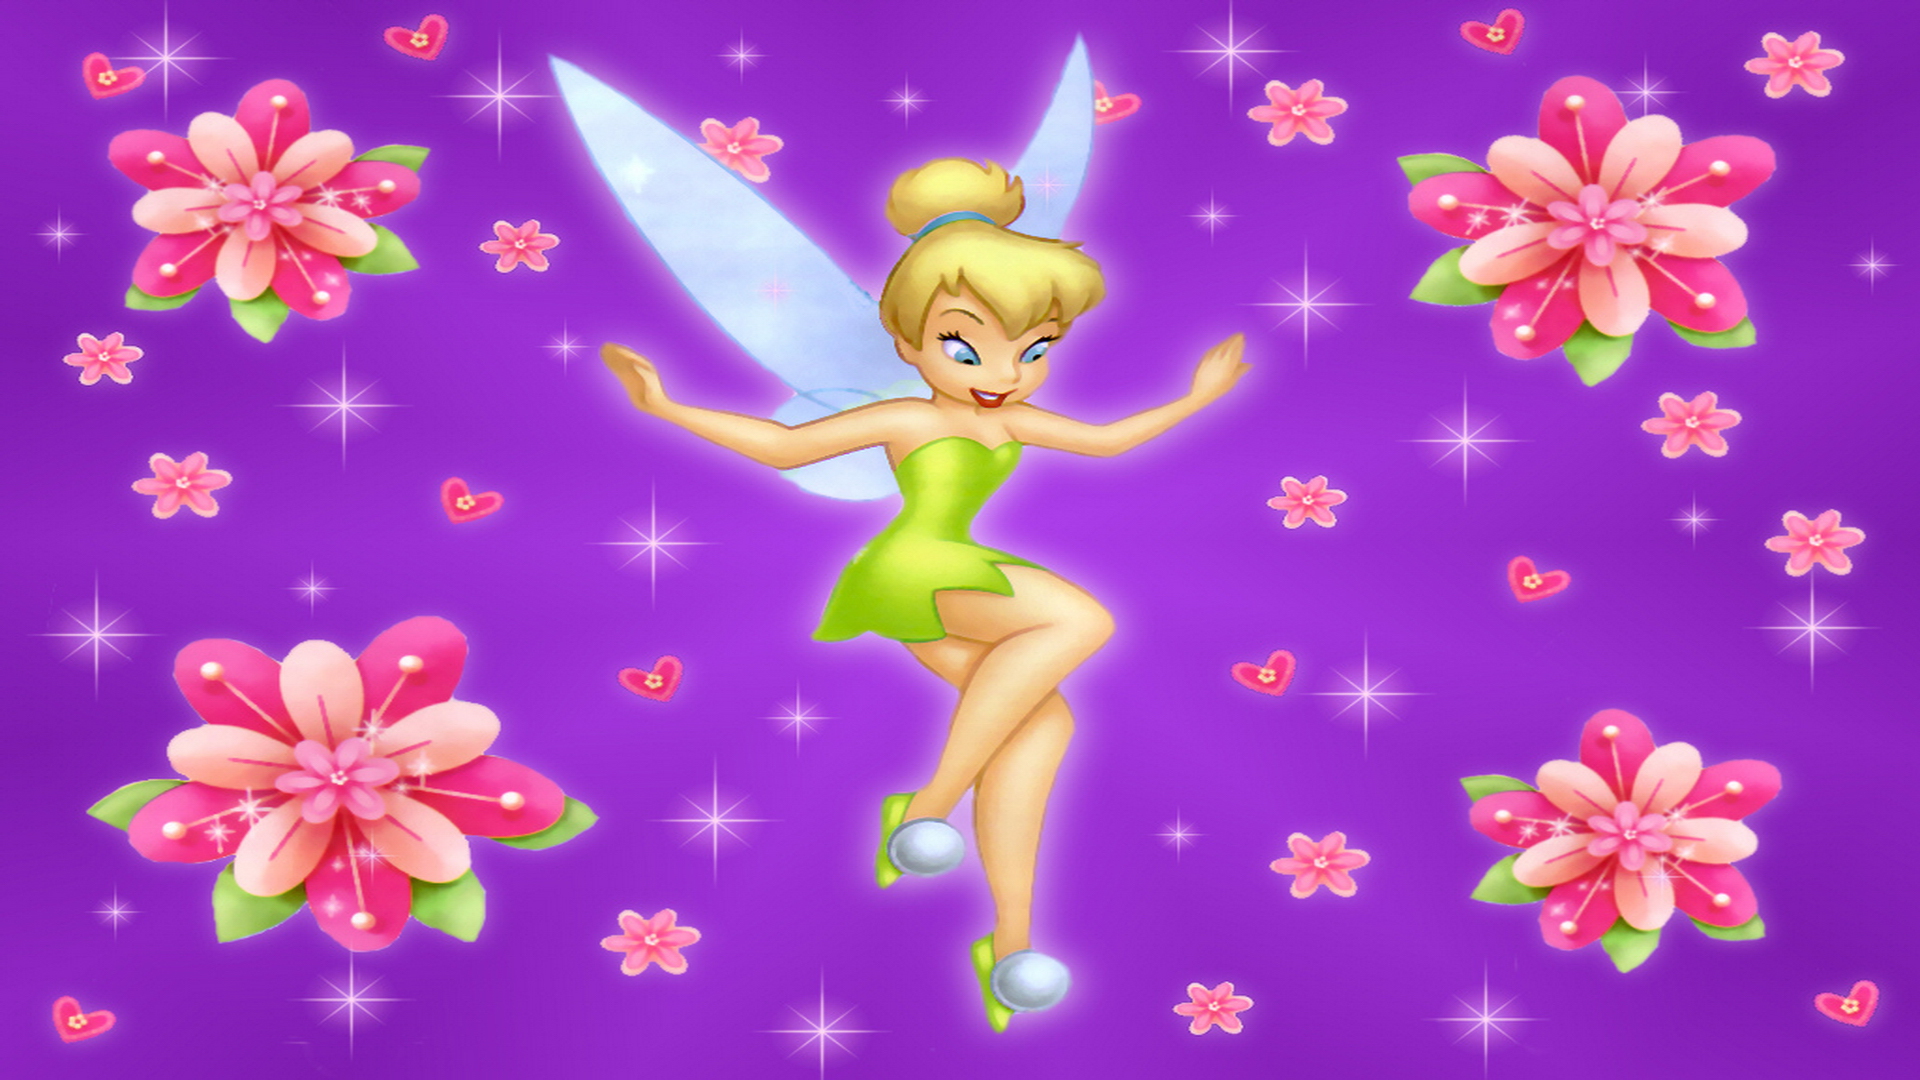 Tinkerbell wallpaper for your computer - Tinkerbell